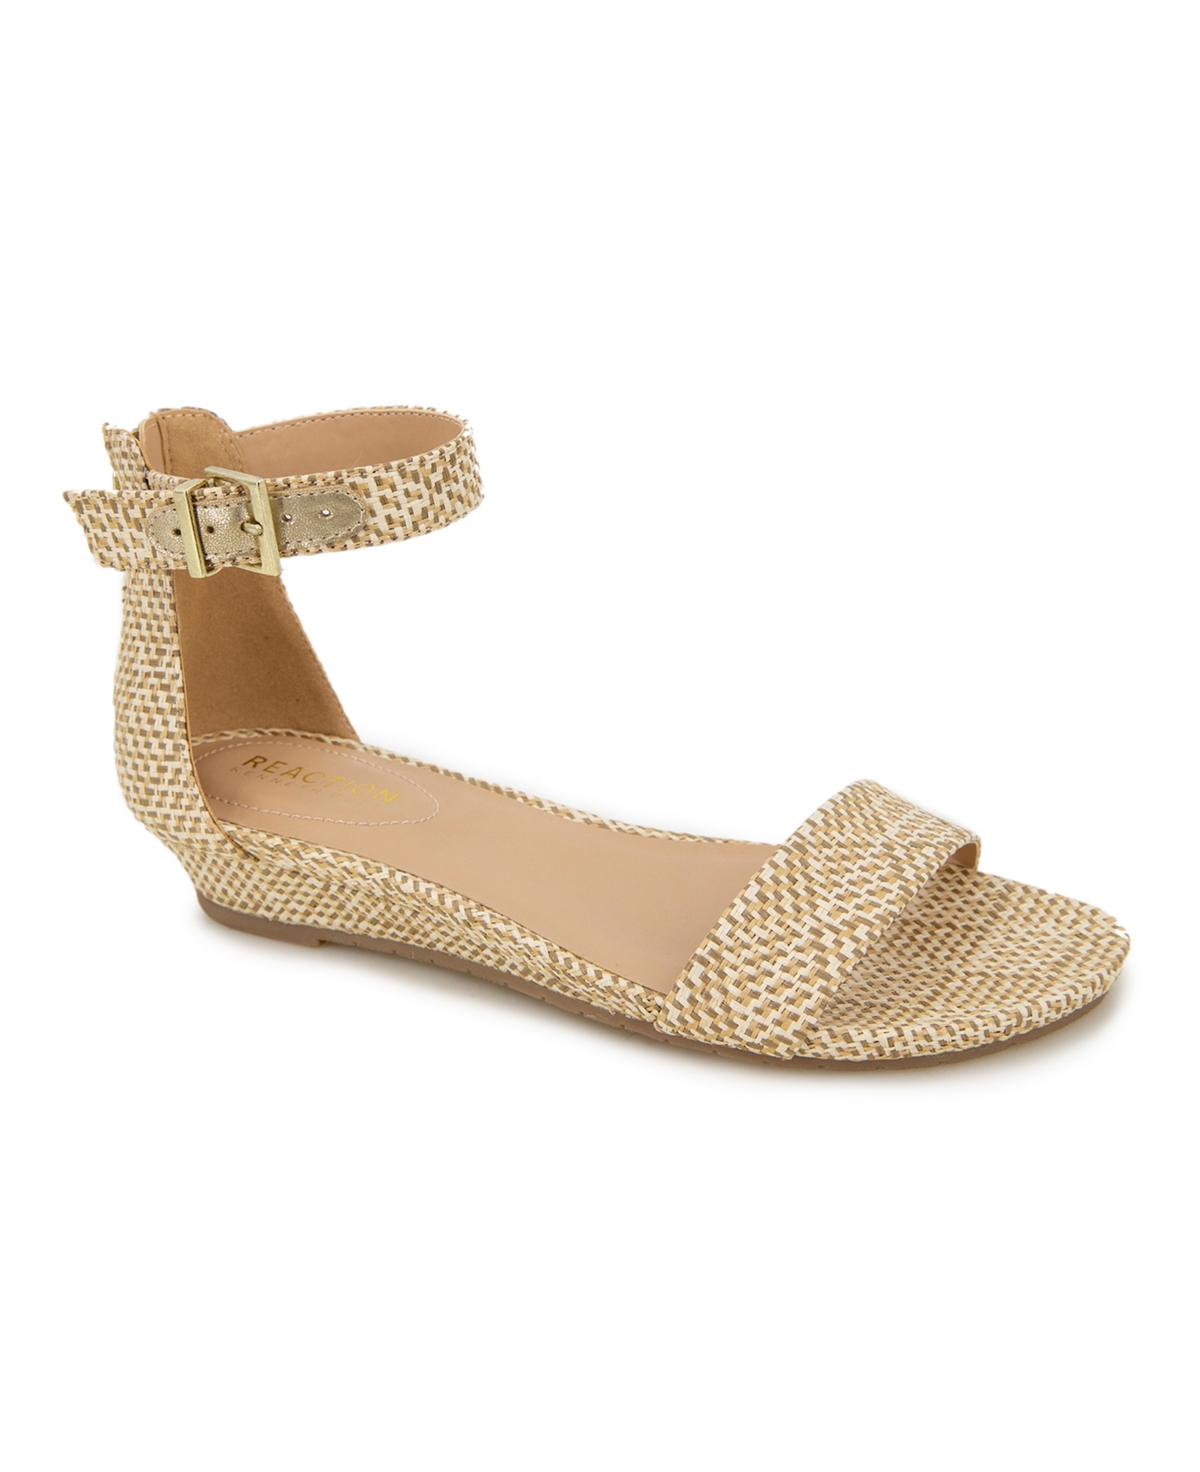 Kenneth Cole Reaction Women's Great Viber Sandals In Natural - Raffia